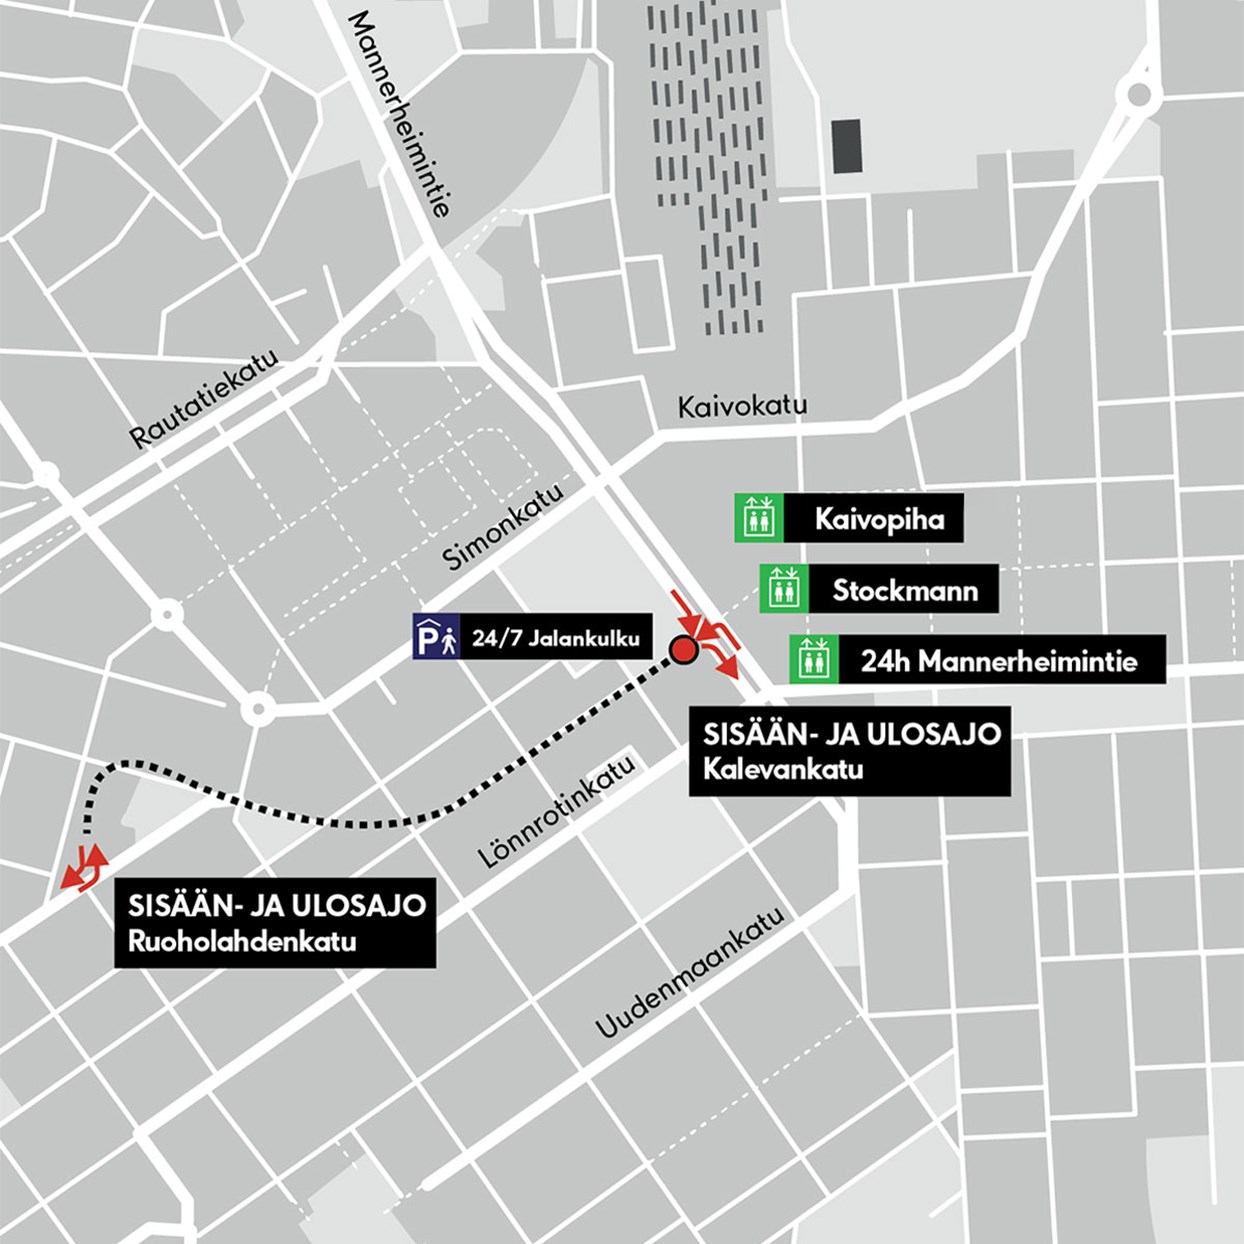 Map showing entry points to Helsinki Stockmann parking facility